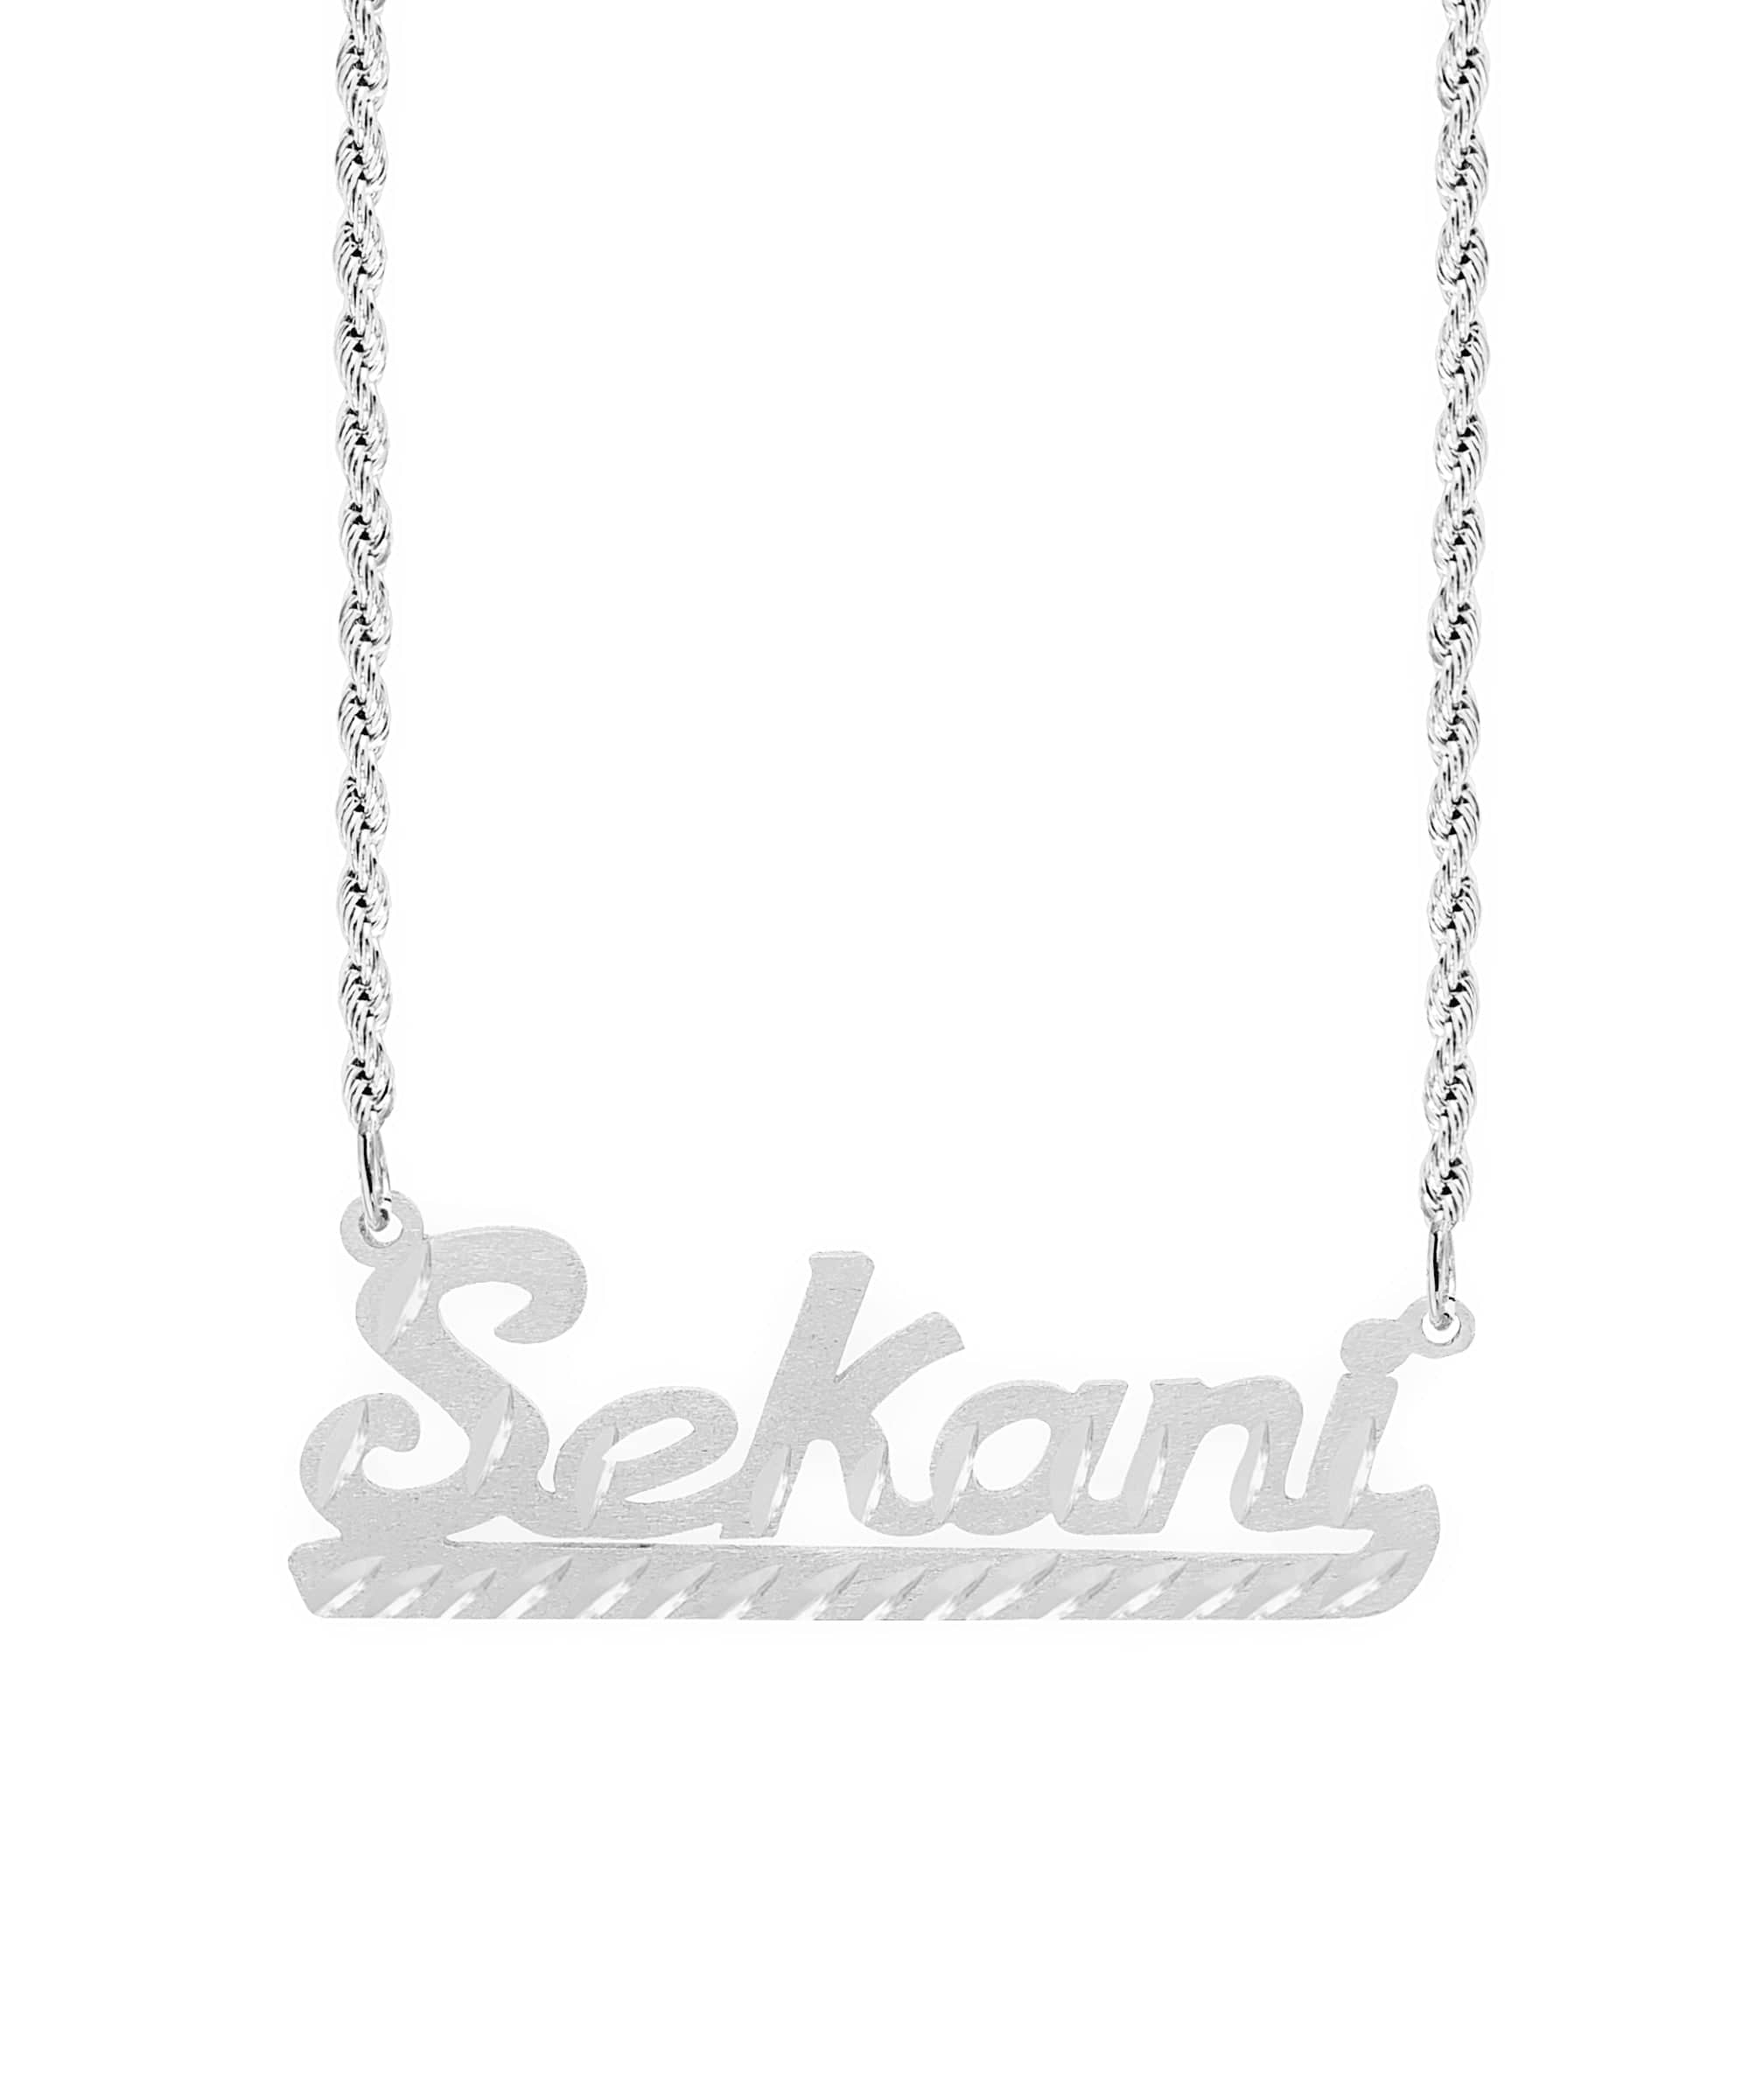 Personalized Name necklace with Diamond Cut "Sekani"